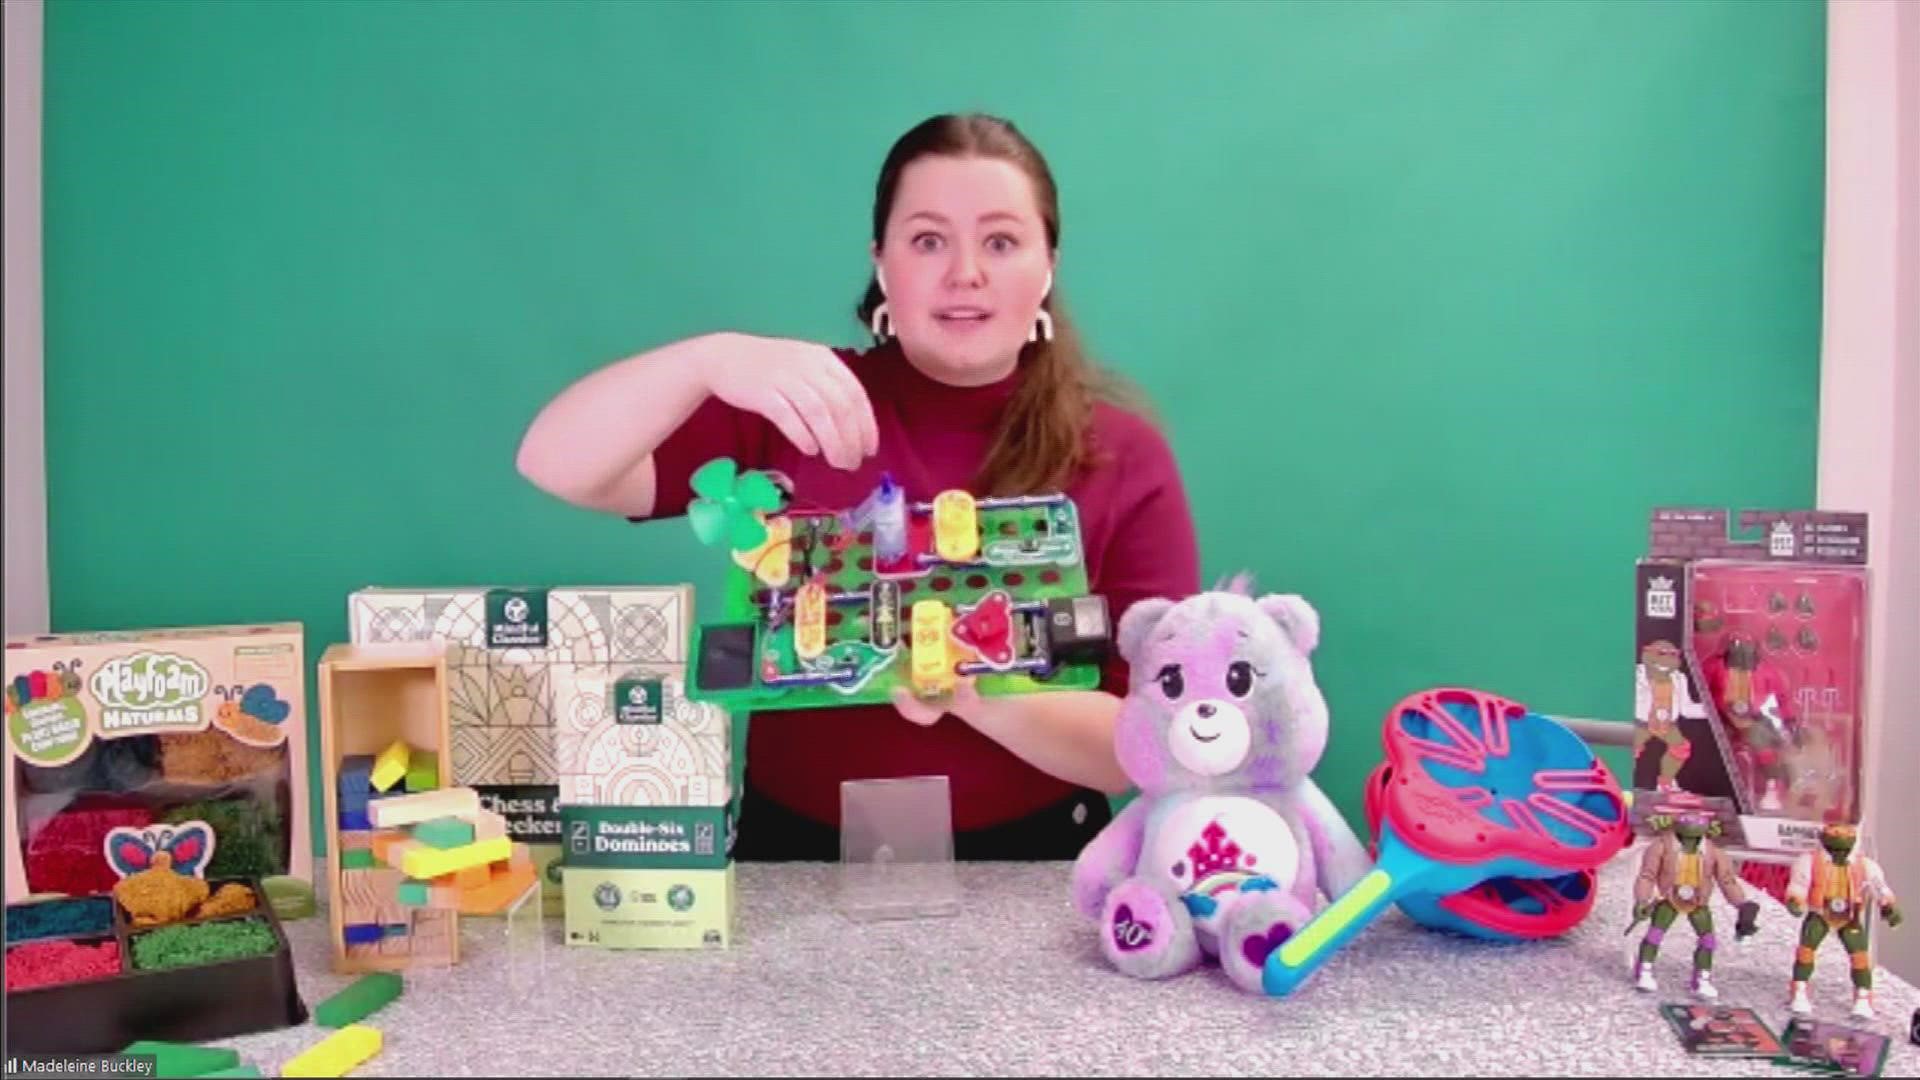 The Toy Insider wants Washingtonians to consider some eco-friendly toy options when checking off their gift list.